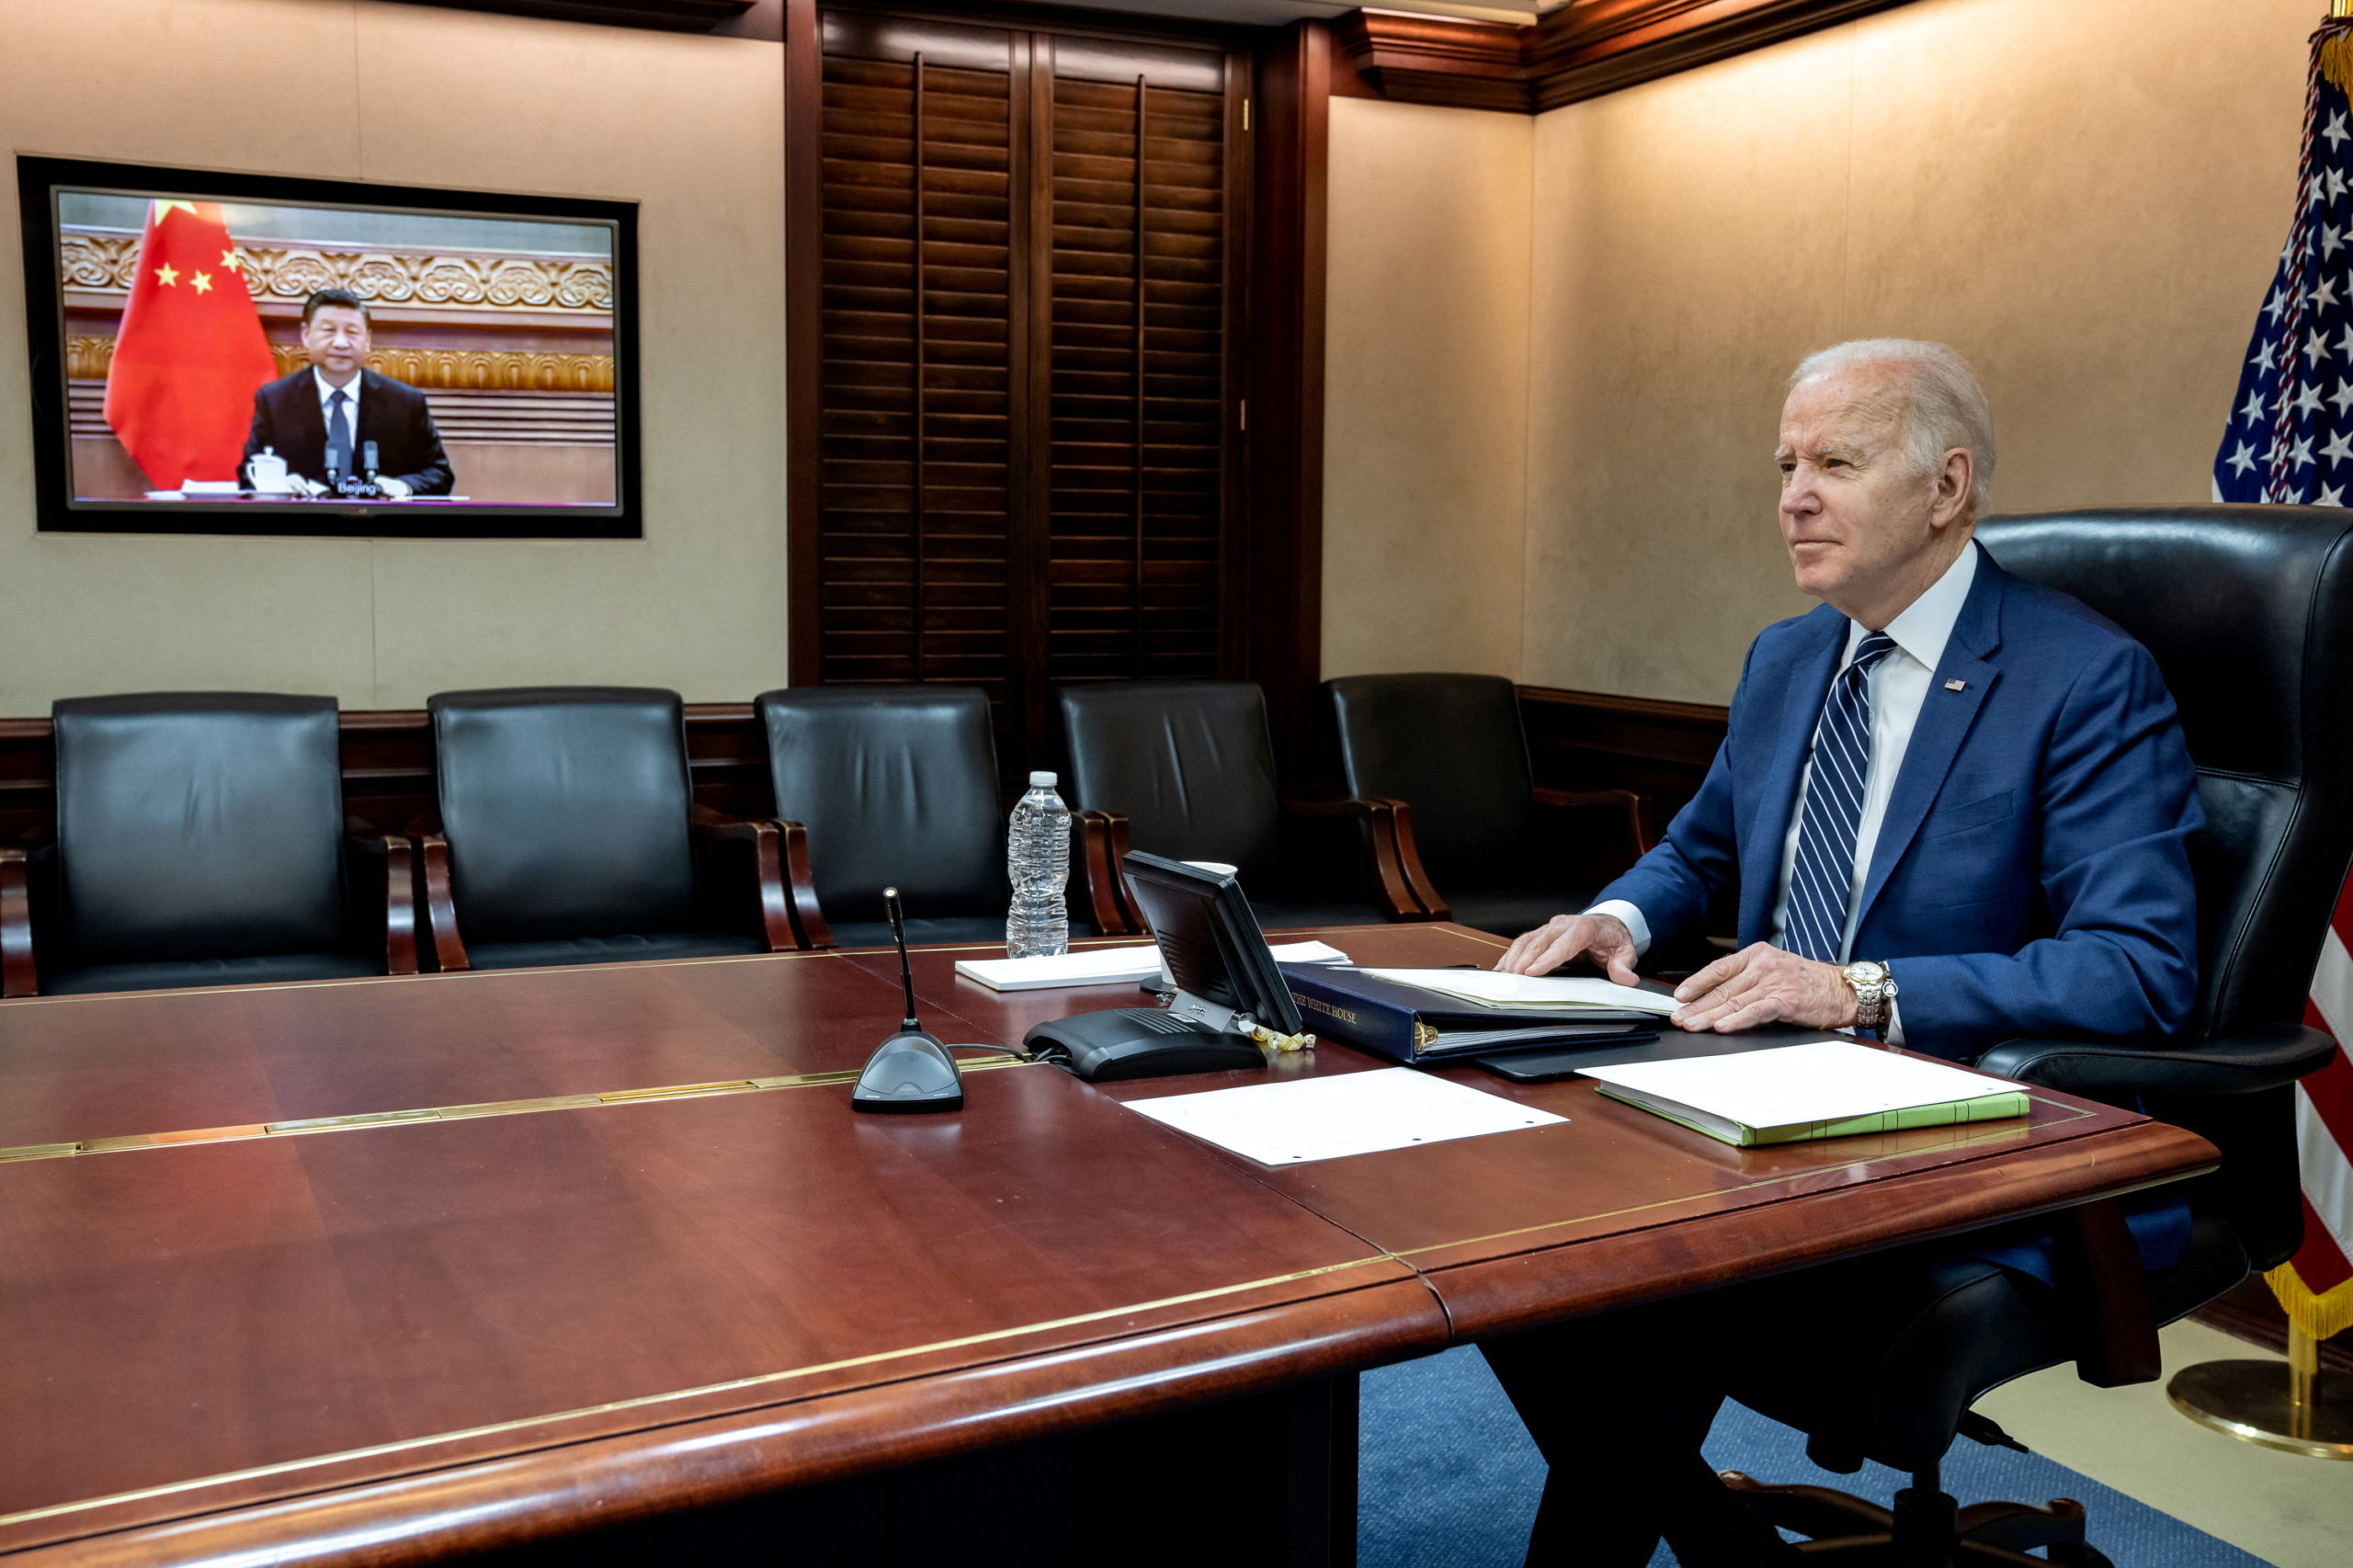 U.S. President Joe Biden holds virtual talks with Chinese President Xi Jinping from the Situation Room at the White House in Washington, U.S., March 18, 2022. The White House/Handout via REUTERS. THIS IMAGE HAS BEEN SUPPLIED BY A THIRD PARTY. TPX IMAGES OF THE DAY